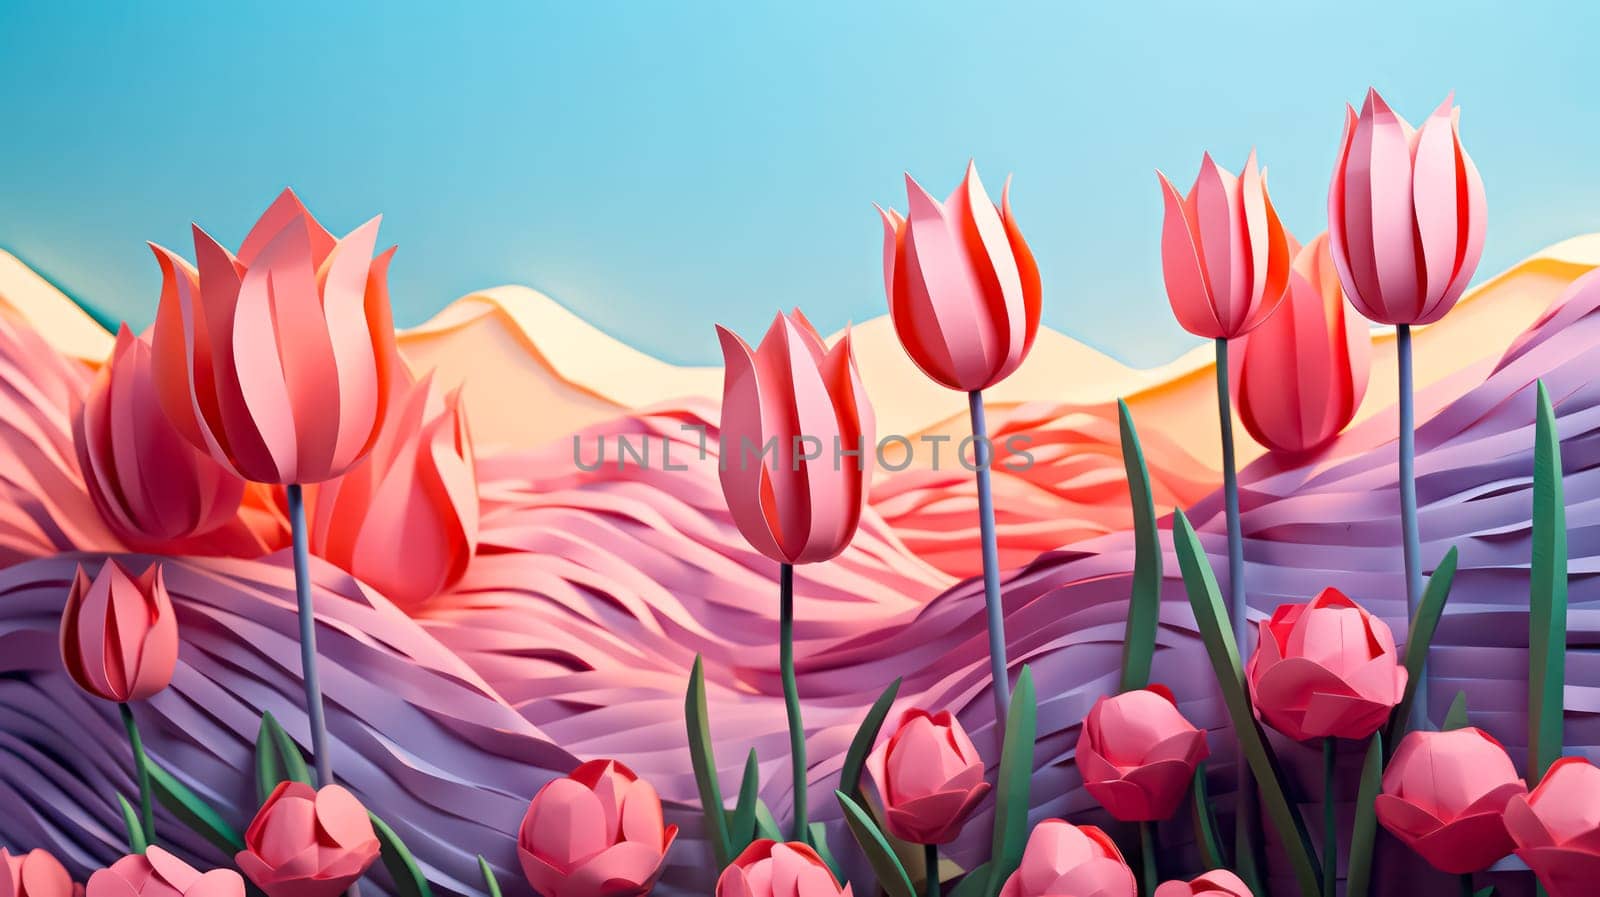 vibrant tulips meticulously cut, forming a delightful composition against a colorful background. by Alla_Morozova93